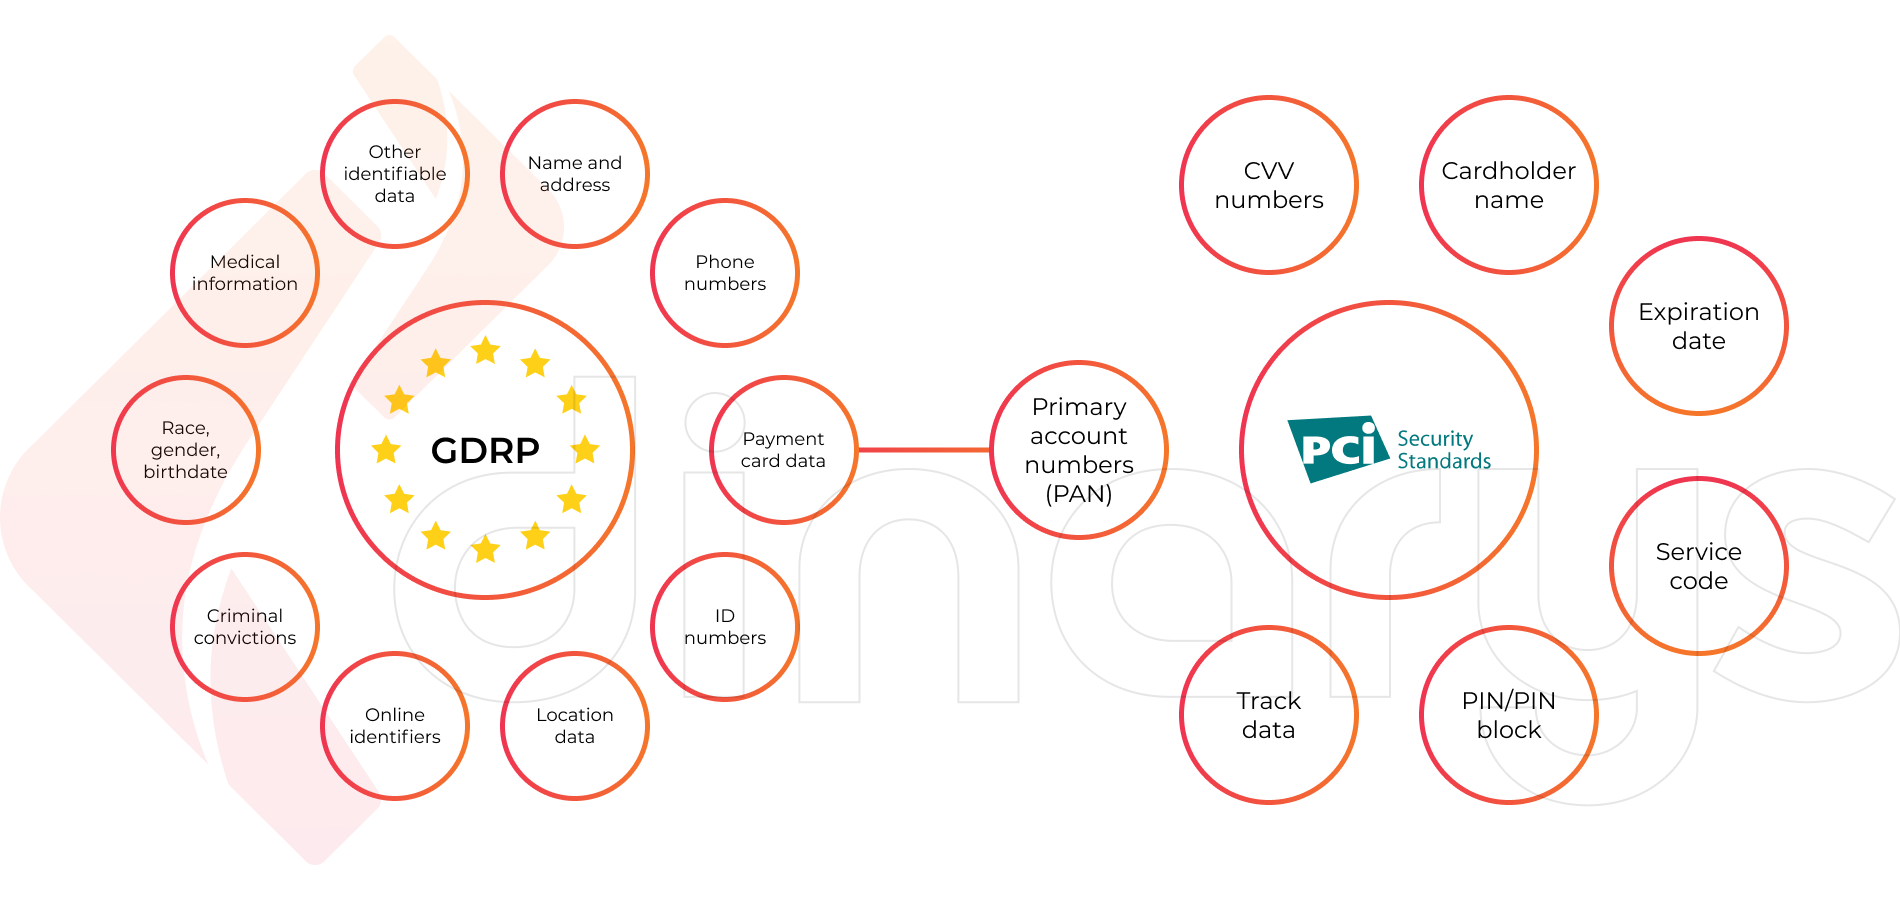 The PCI DSS vs the GDPR: The Main Differences